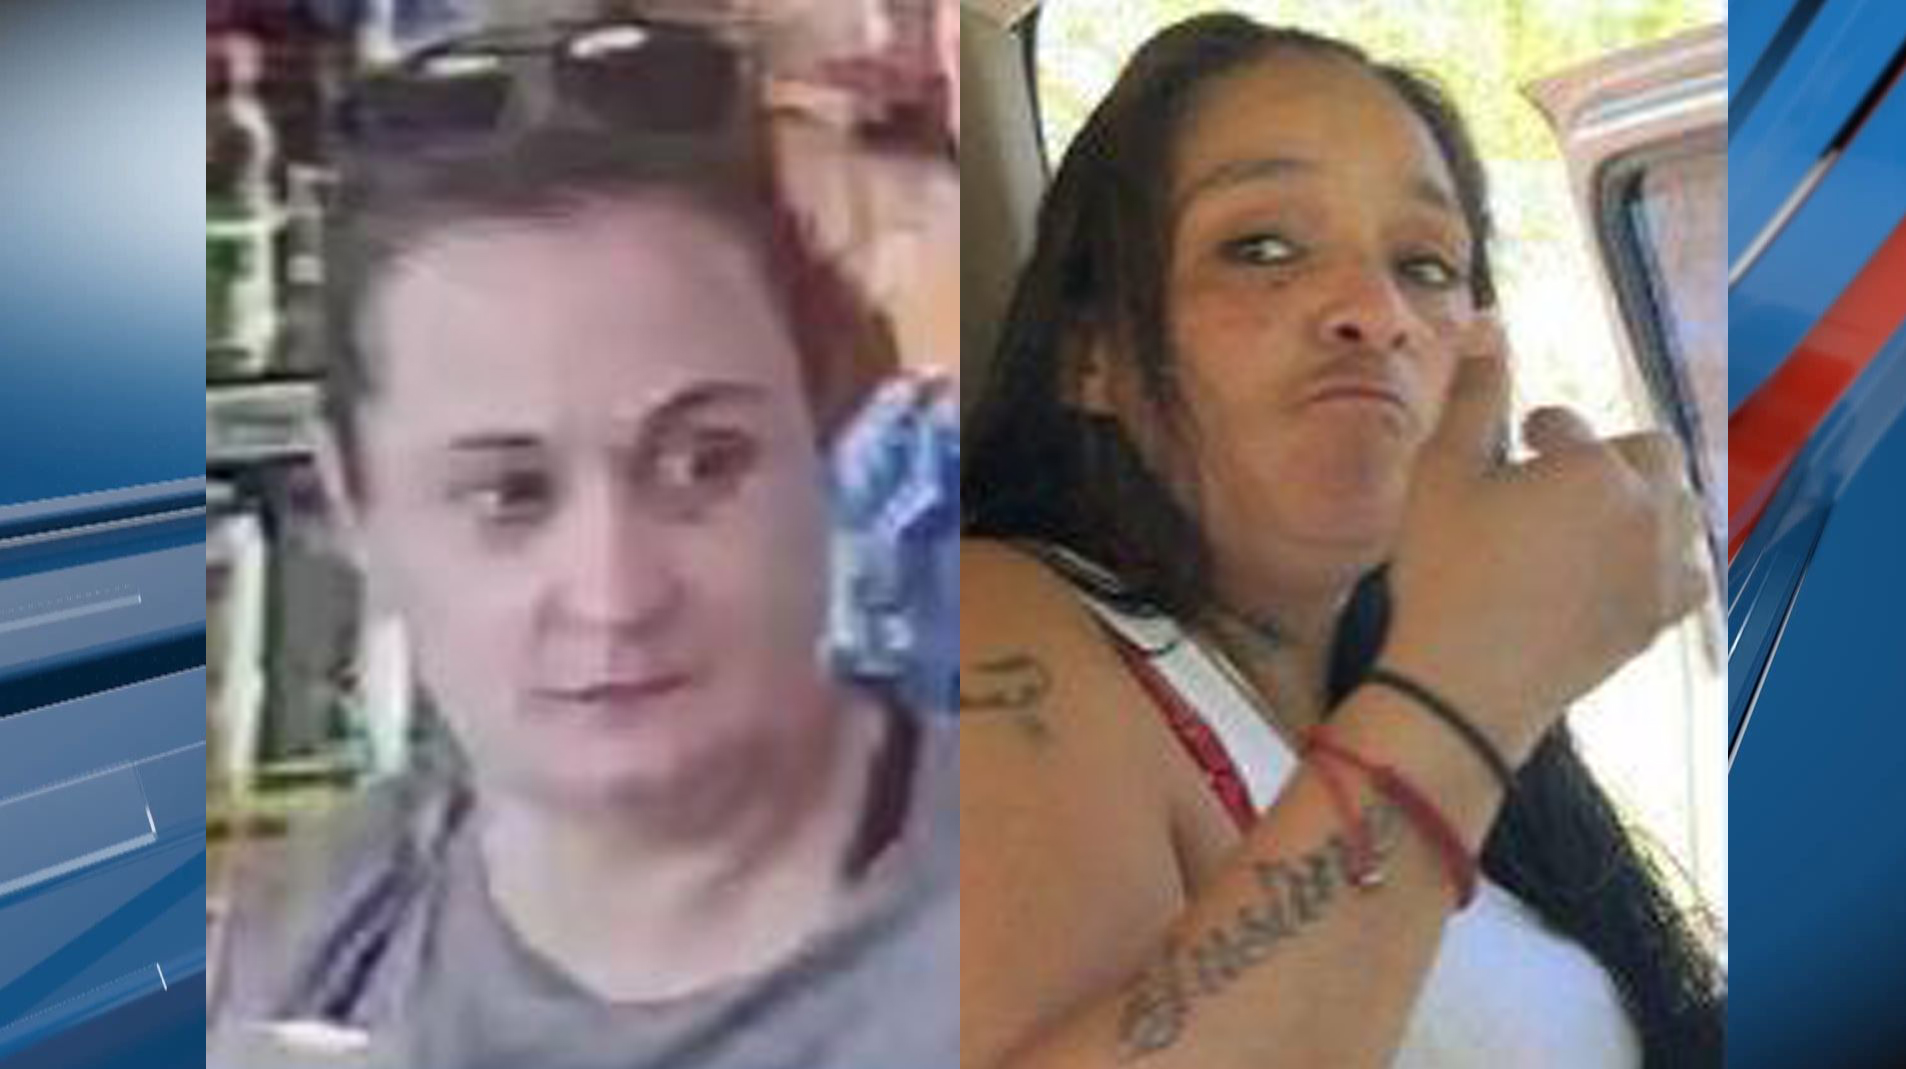 2 Emporia women reported missing near Denver, believed to be together pic